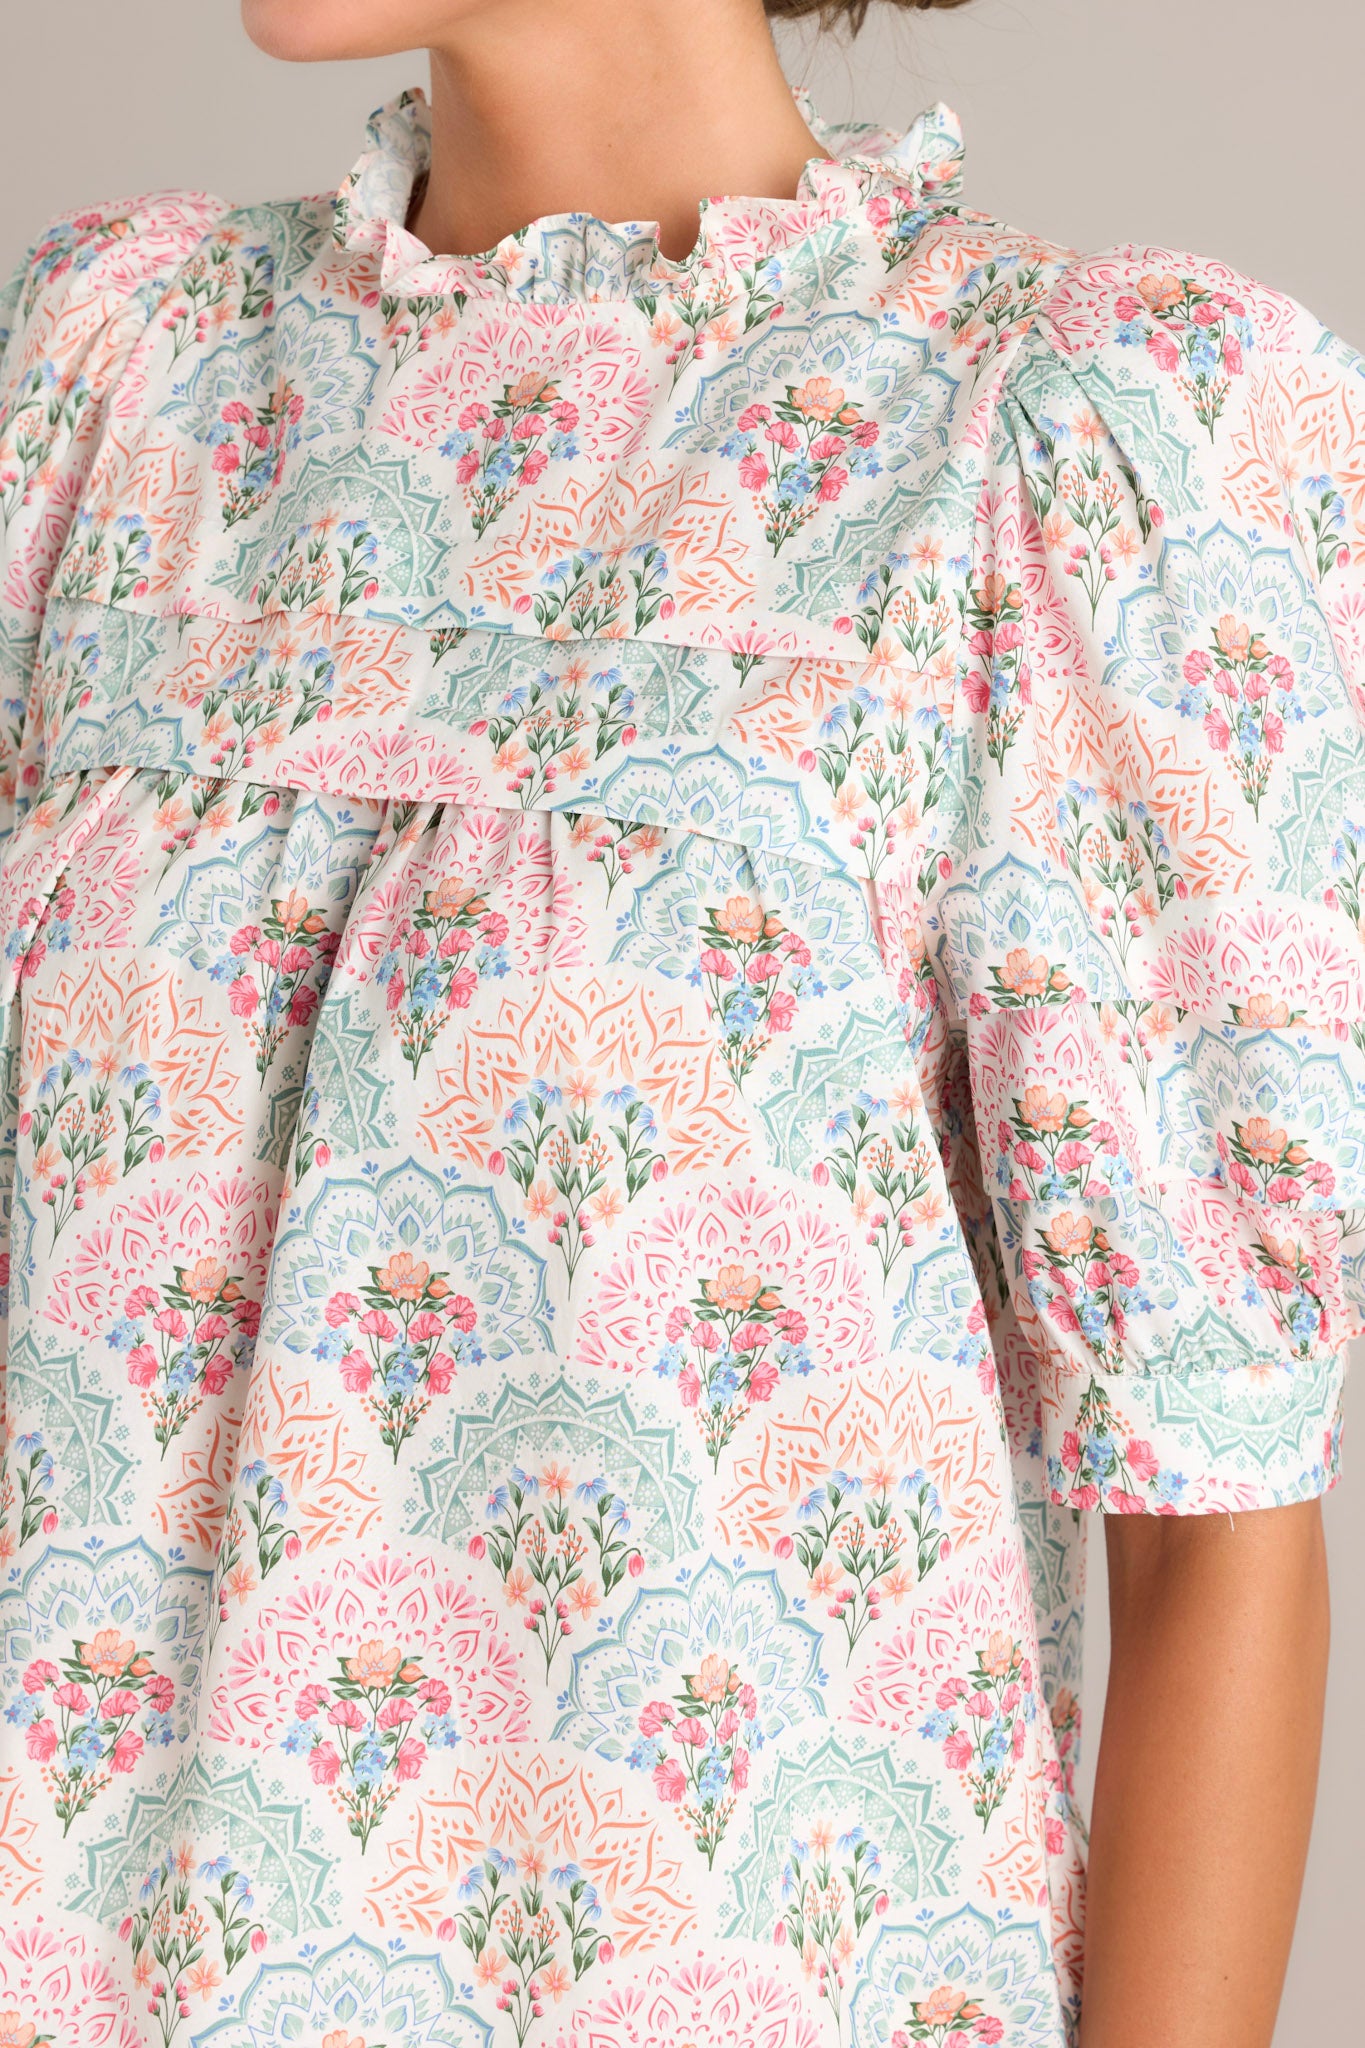 Close-up of the fabric of the pastel floral print top, highlighting the intricate floral design and ruffled yoke details.